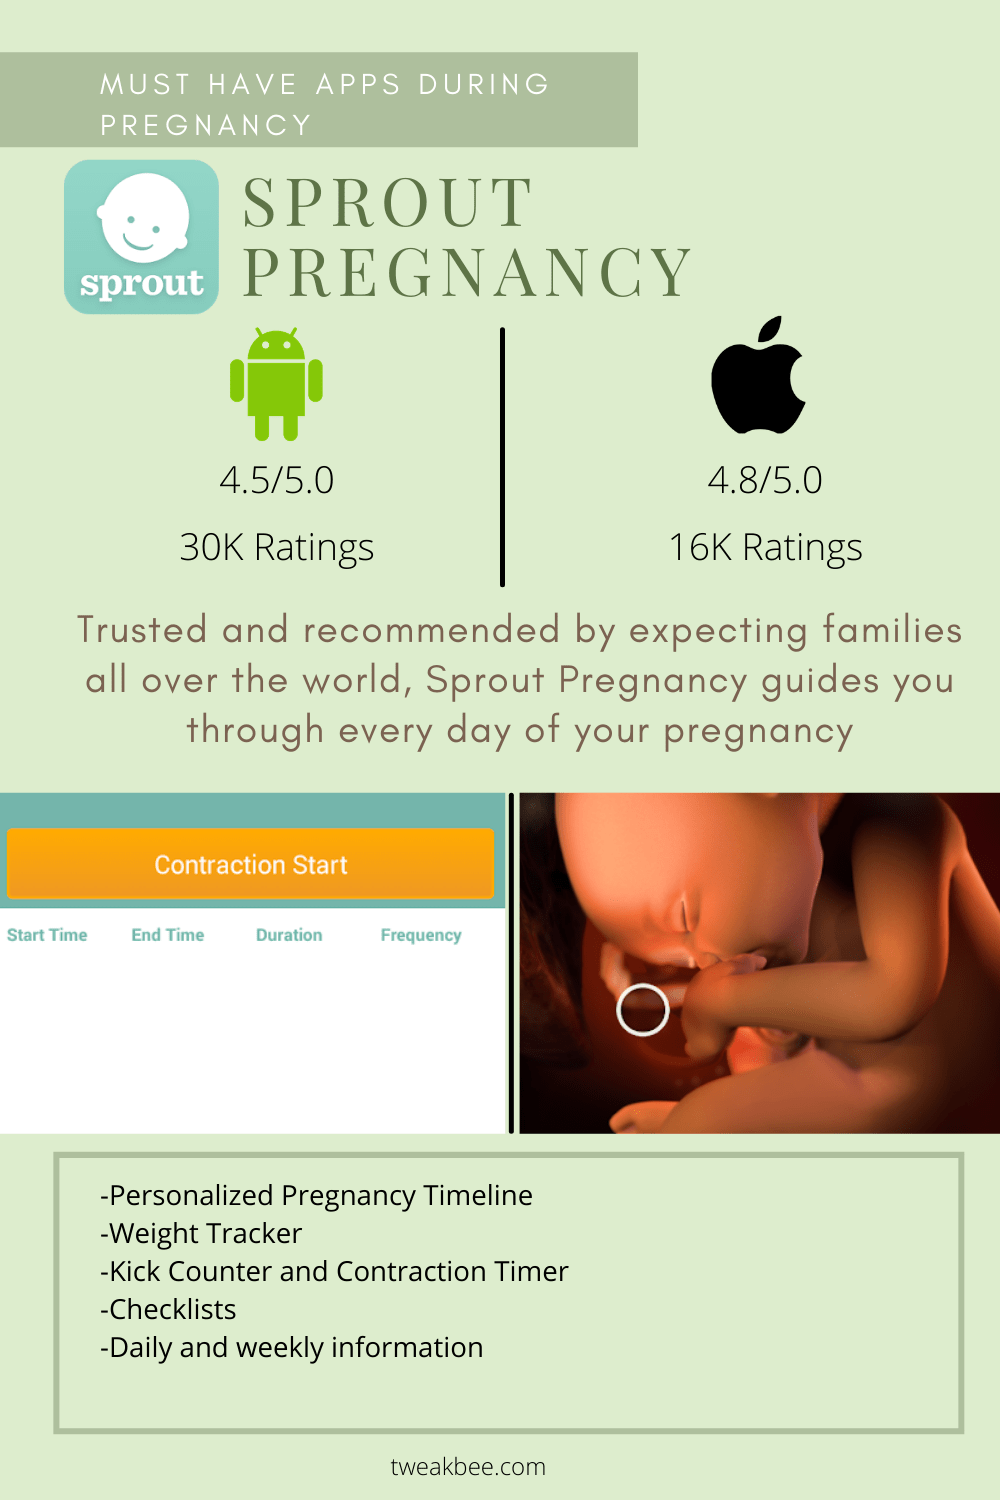 Sprout Pregnancy app - Must Have Apps During Pregnancy